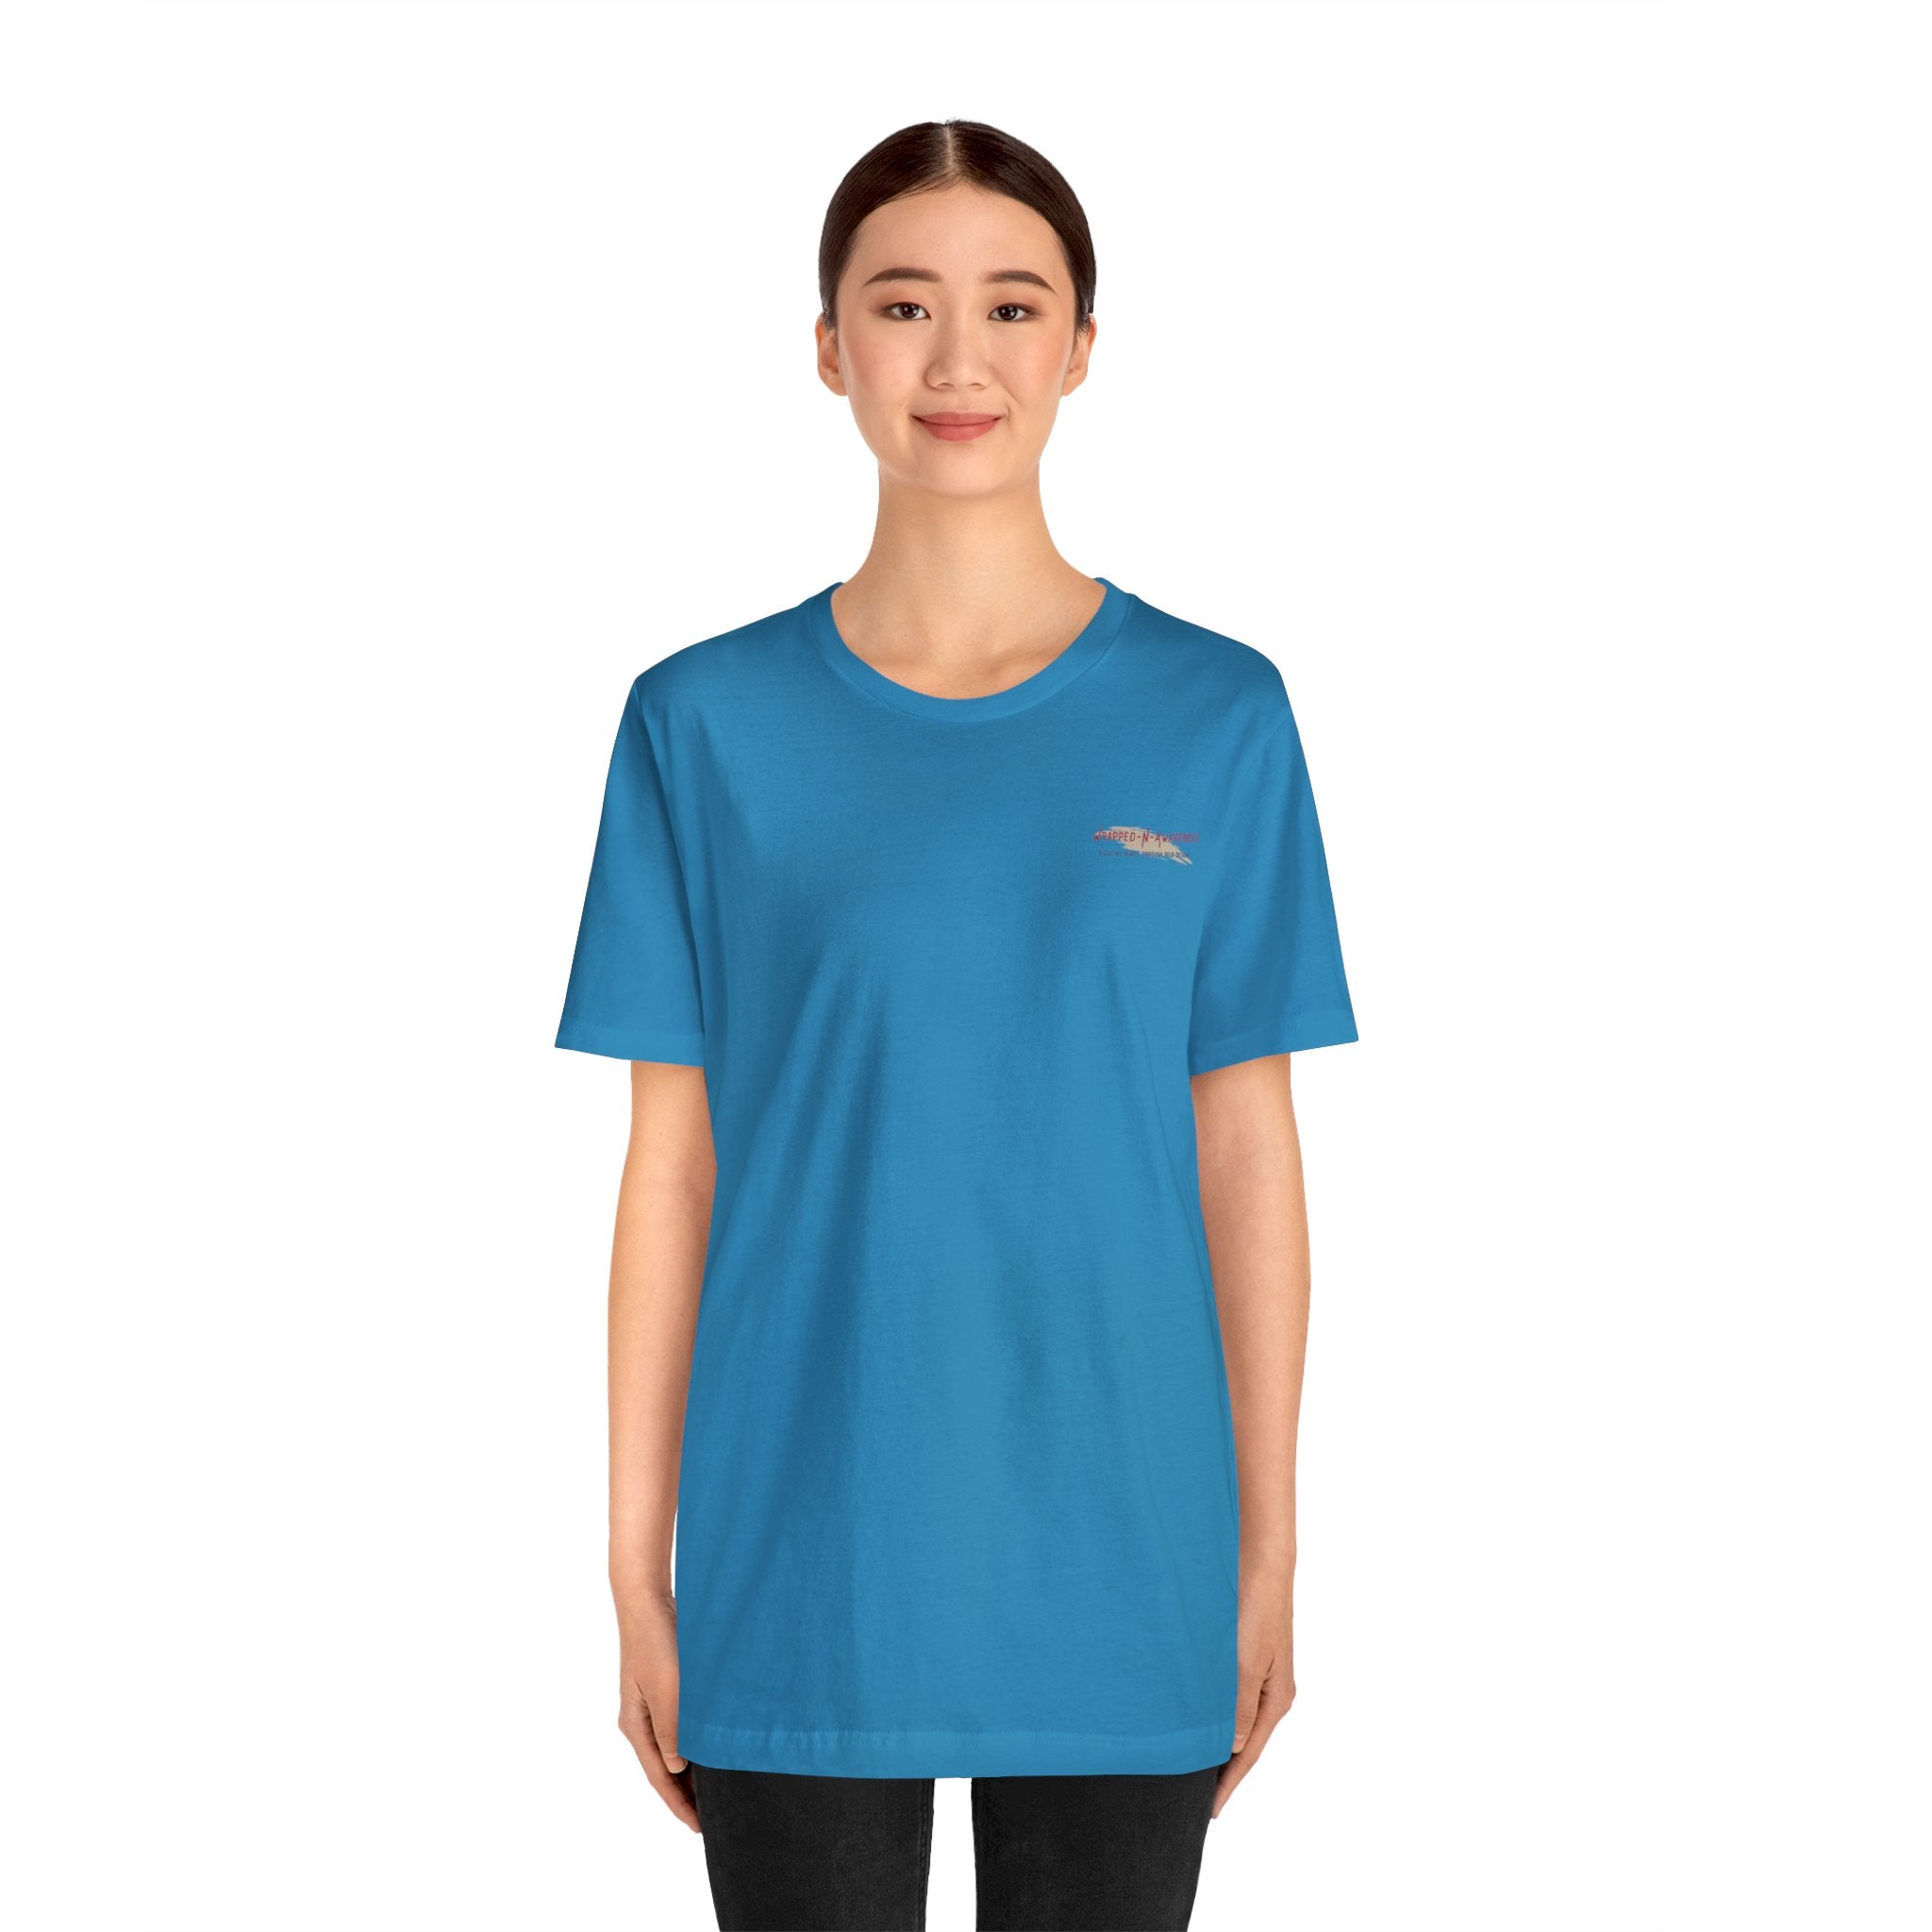 Inspire Growth Jersey Tee - Bella+Canvas 3001 Turquoise Airlume Cotton Bella+Canvas 3001 Crew Neckline Jersey Short Sleeve Lightweight Fabric Mental Health Support Retail Fit Tear-away Label Tee Unisex Tee T-Shirt 12054818810664347216_2048 Printify